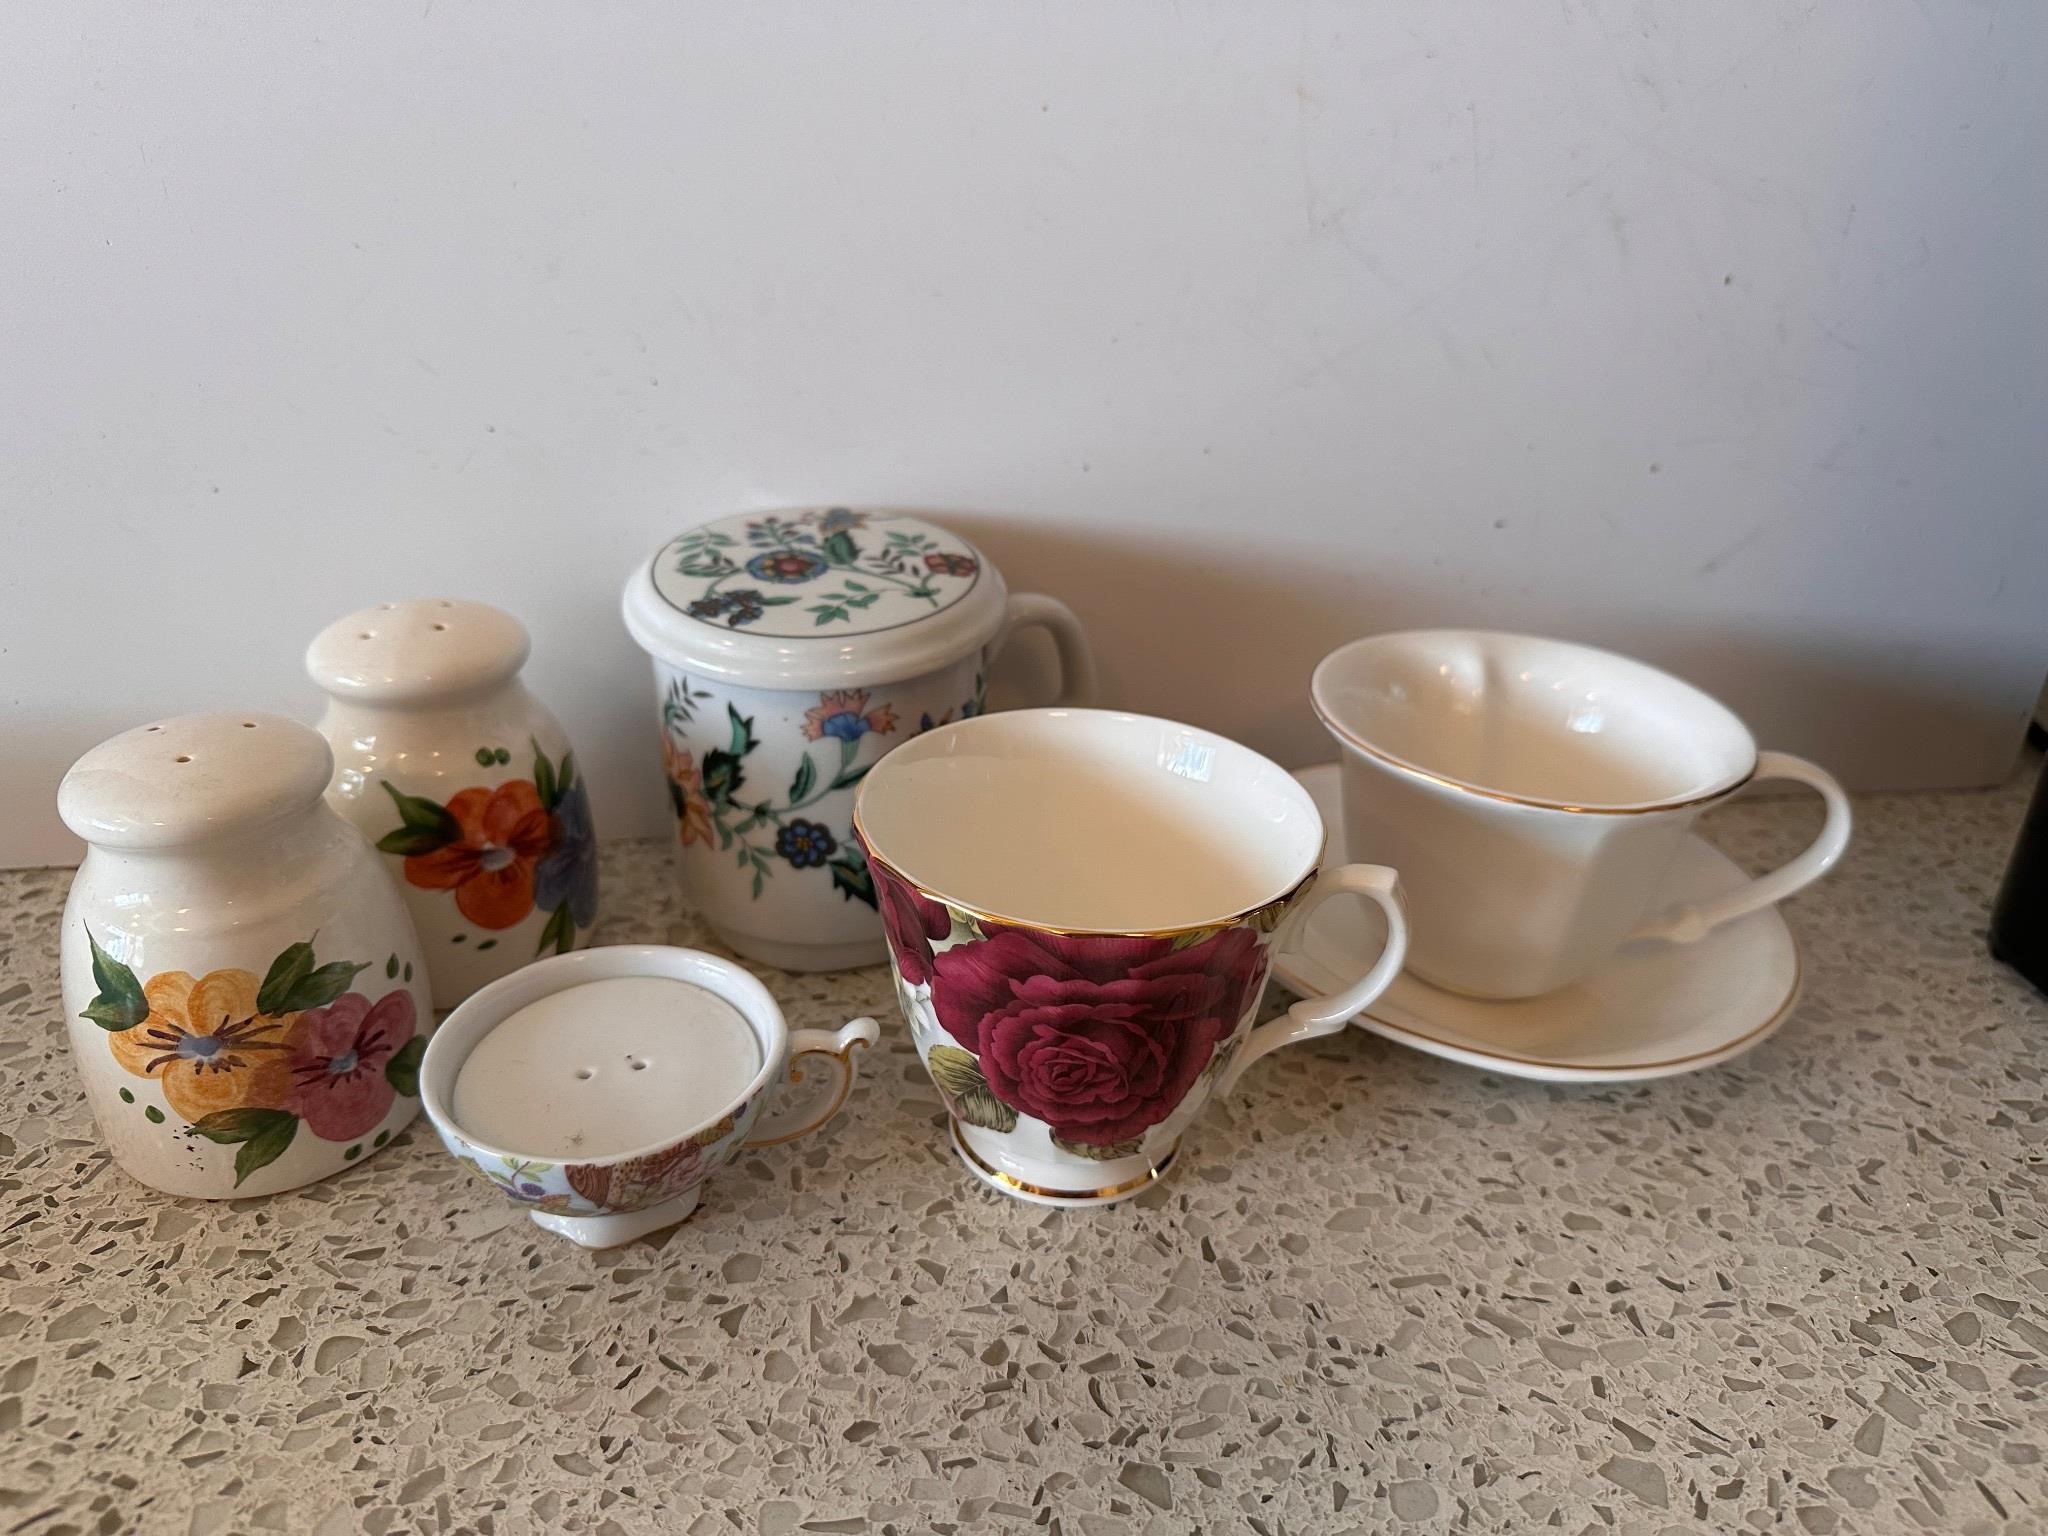 Royale Garden and other teacups